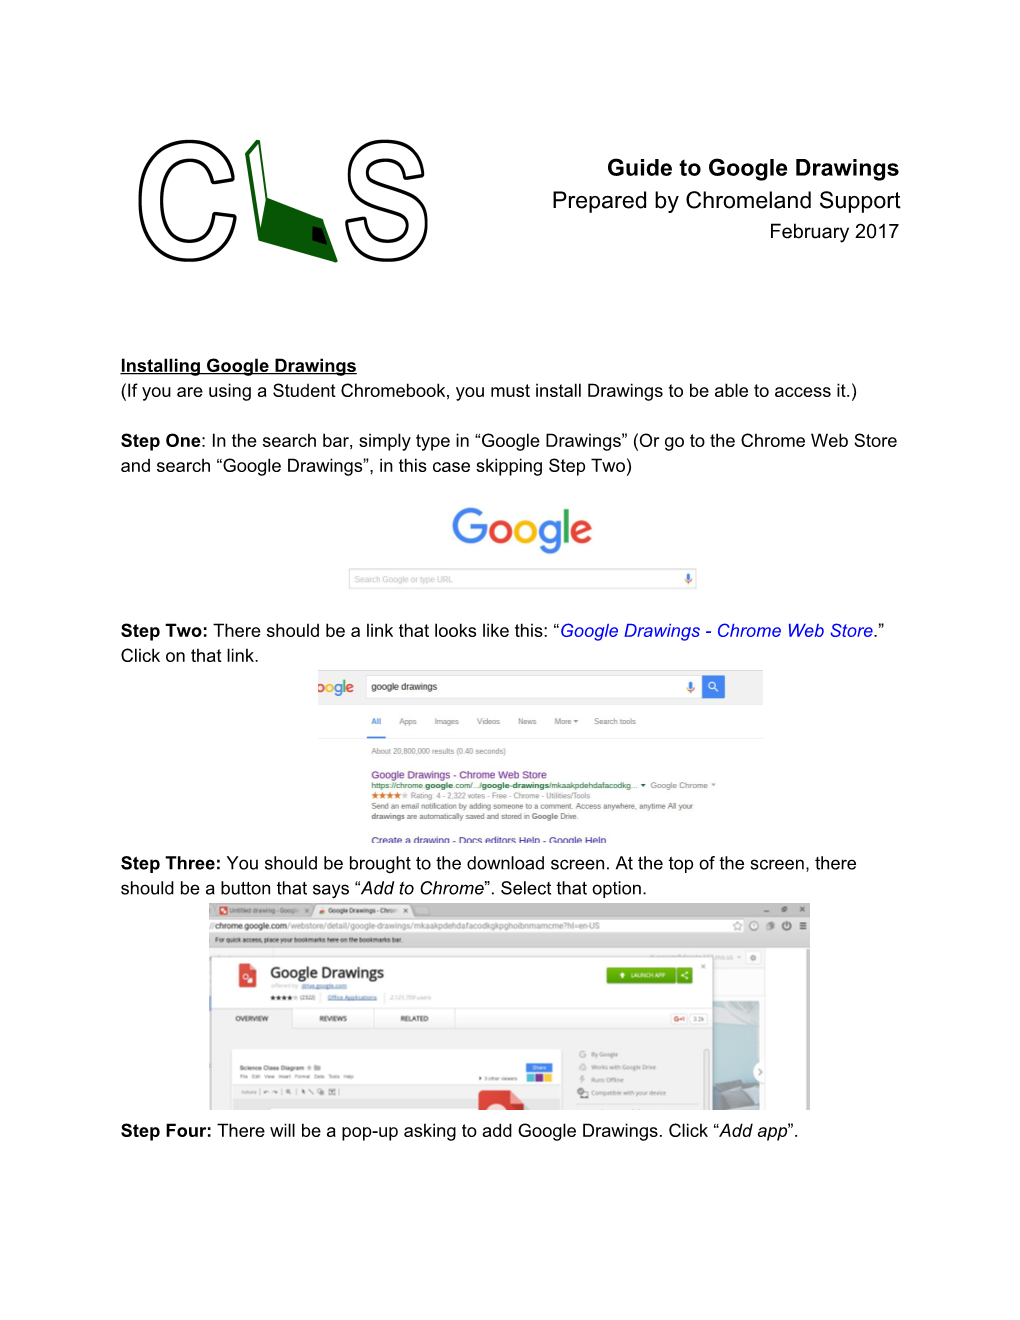 Guide to Google Drawings Prepared by Chromeland Support February 2017